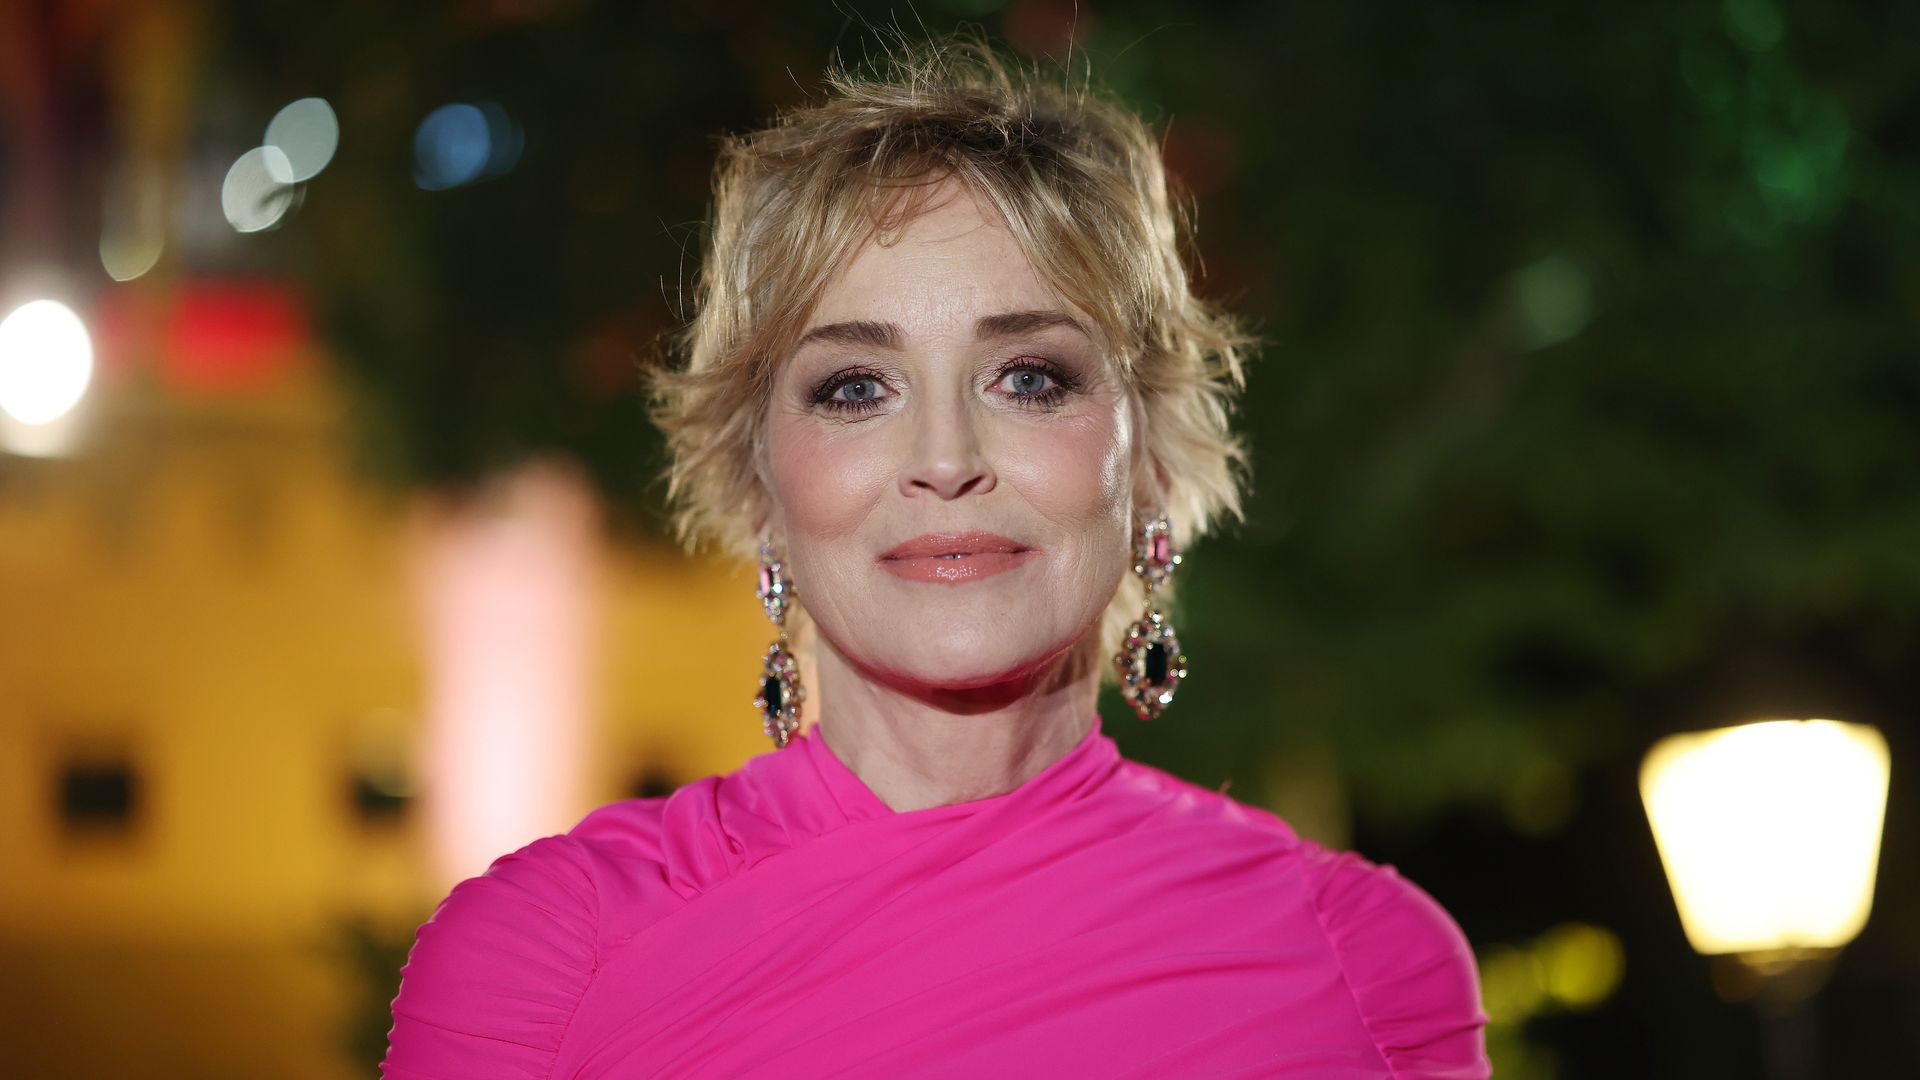 Sharon Stone's rarely-seen son sparks heated debate with controversial graduation photo